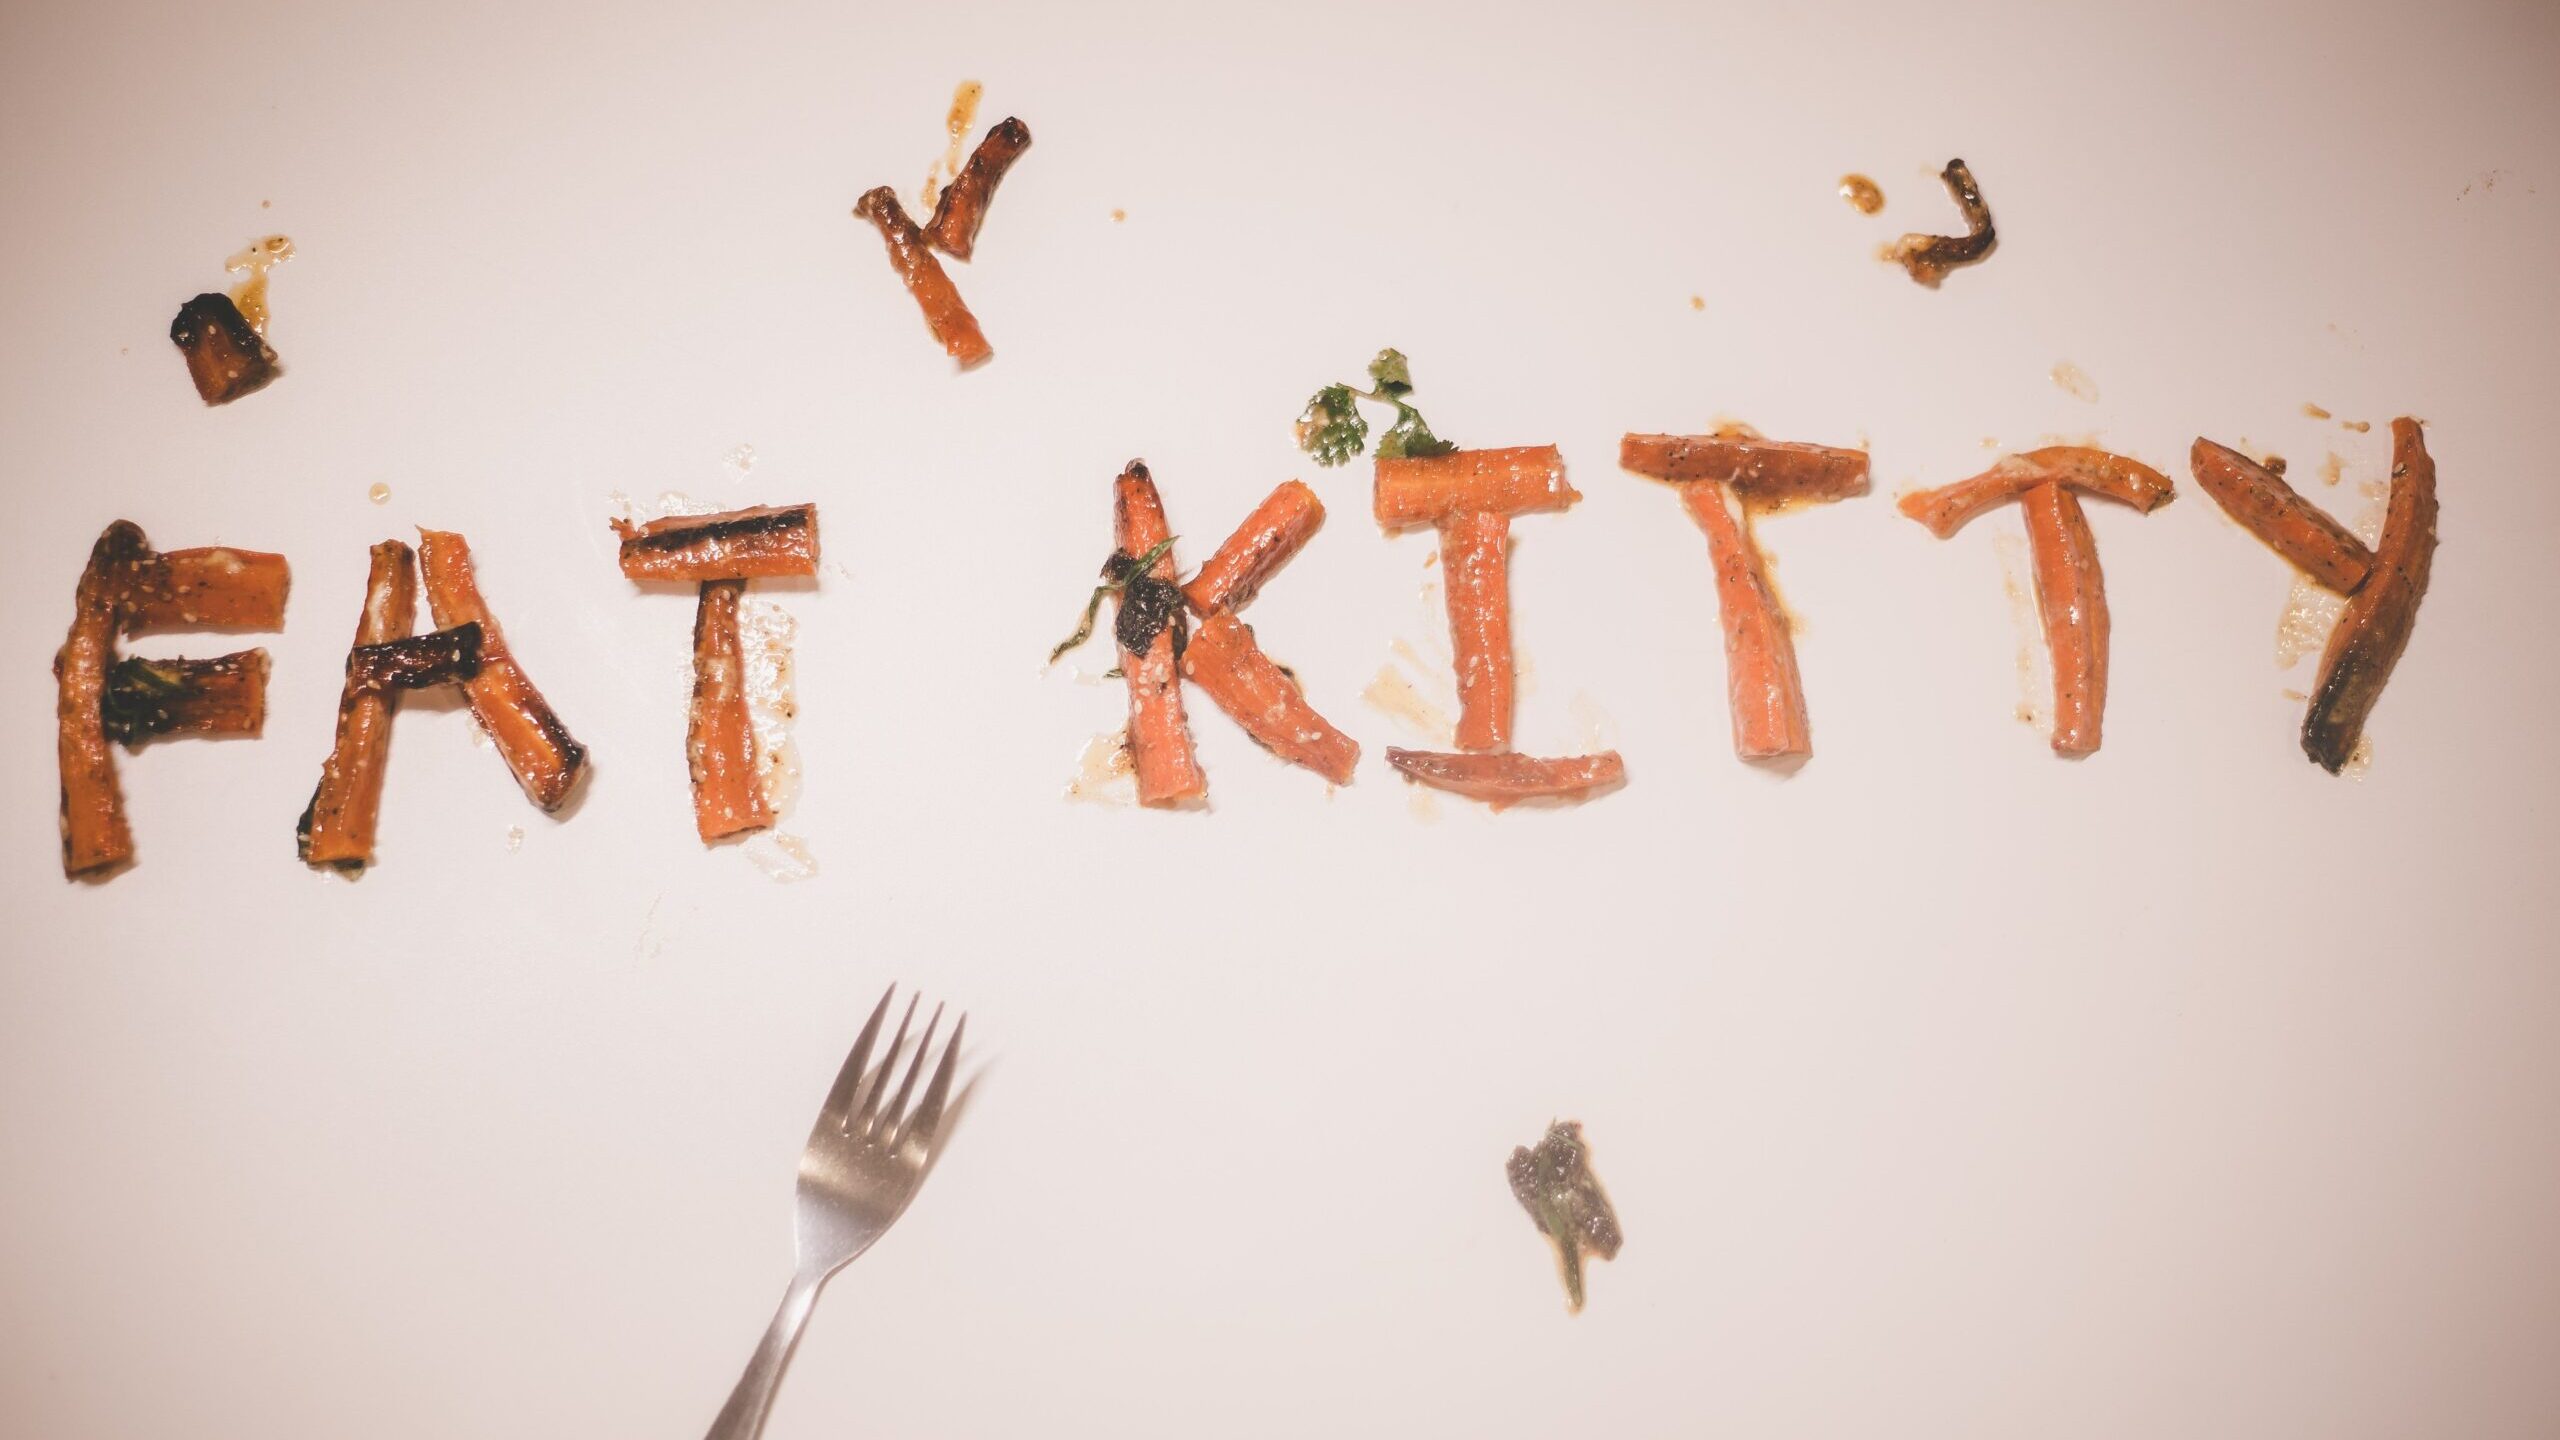 The words "Fat Kitty" are spelled out in carrots across a table.